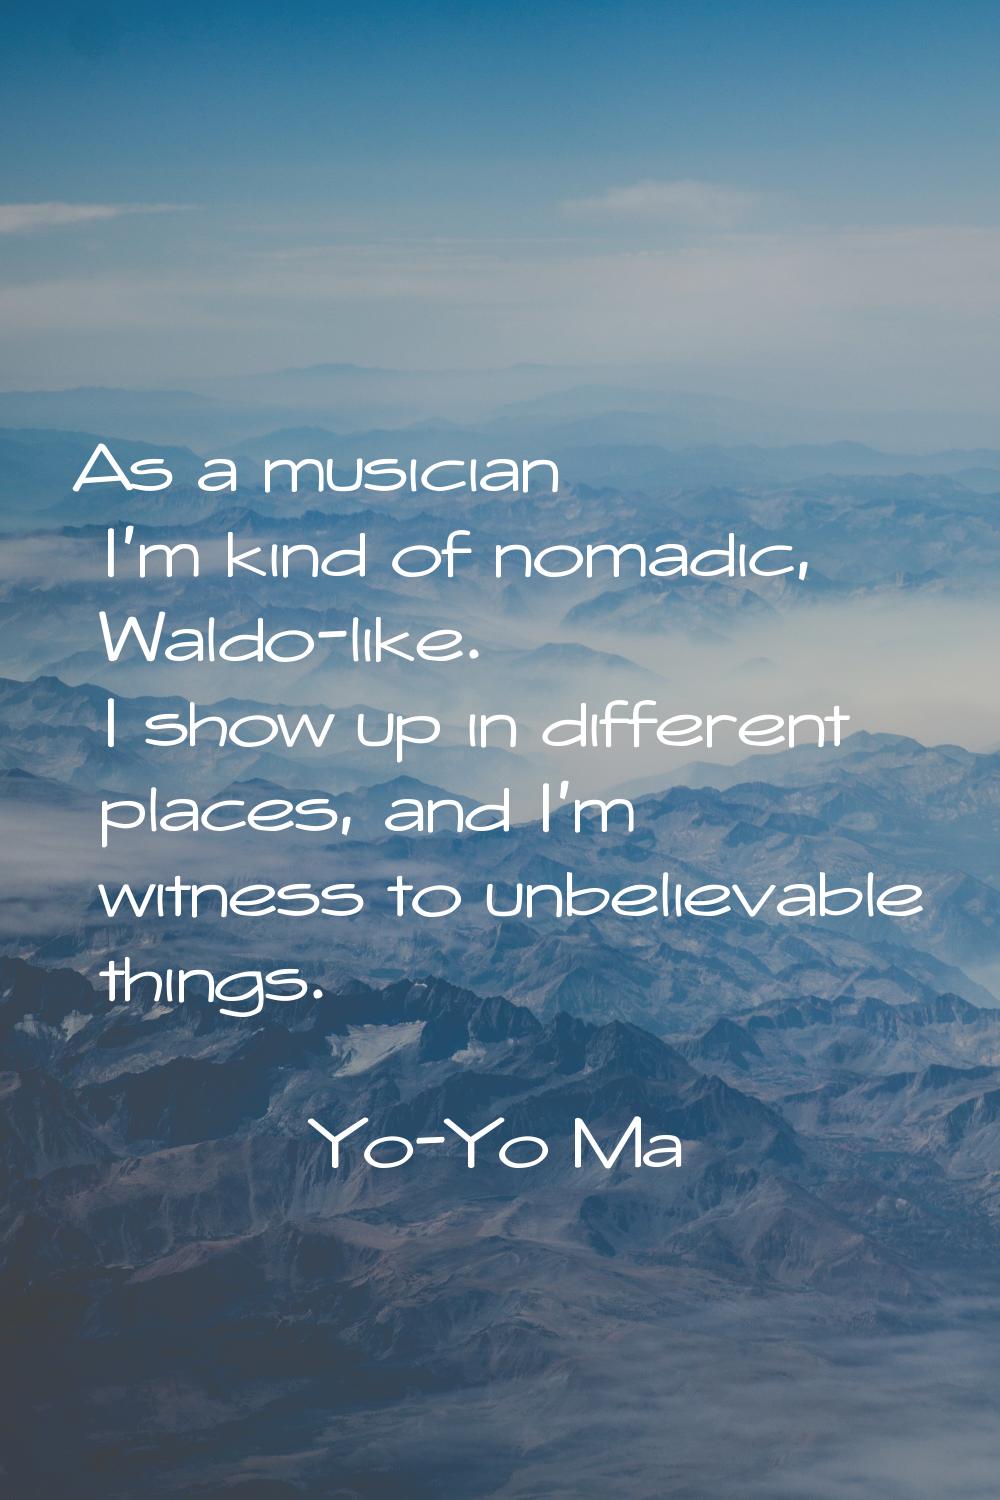 As a musician I'm kind of nomadic, Waldo-like. I show up in different places, and I'm witness to un